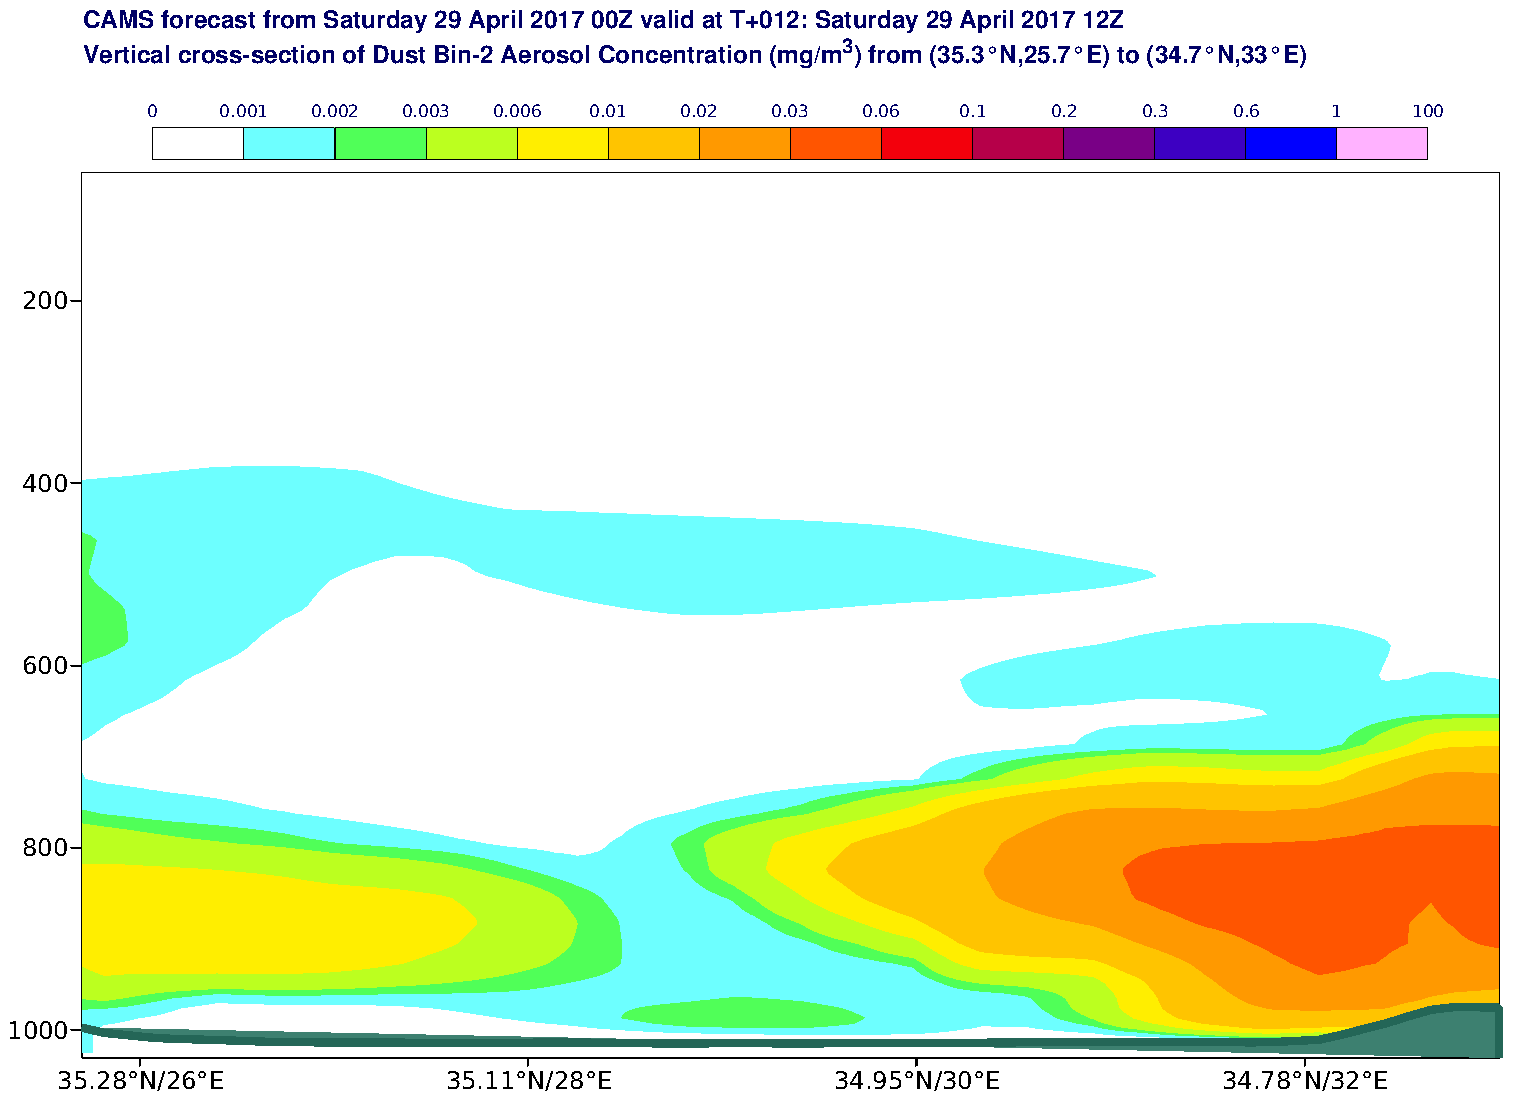 Vertical cross-section of Dust Bin-2 Aerosol Concentration (mg/m3) valid at T12 - 2017-04-29 12:00